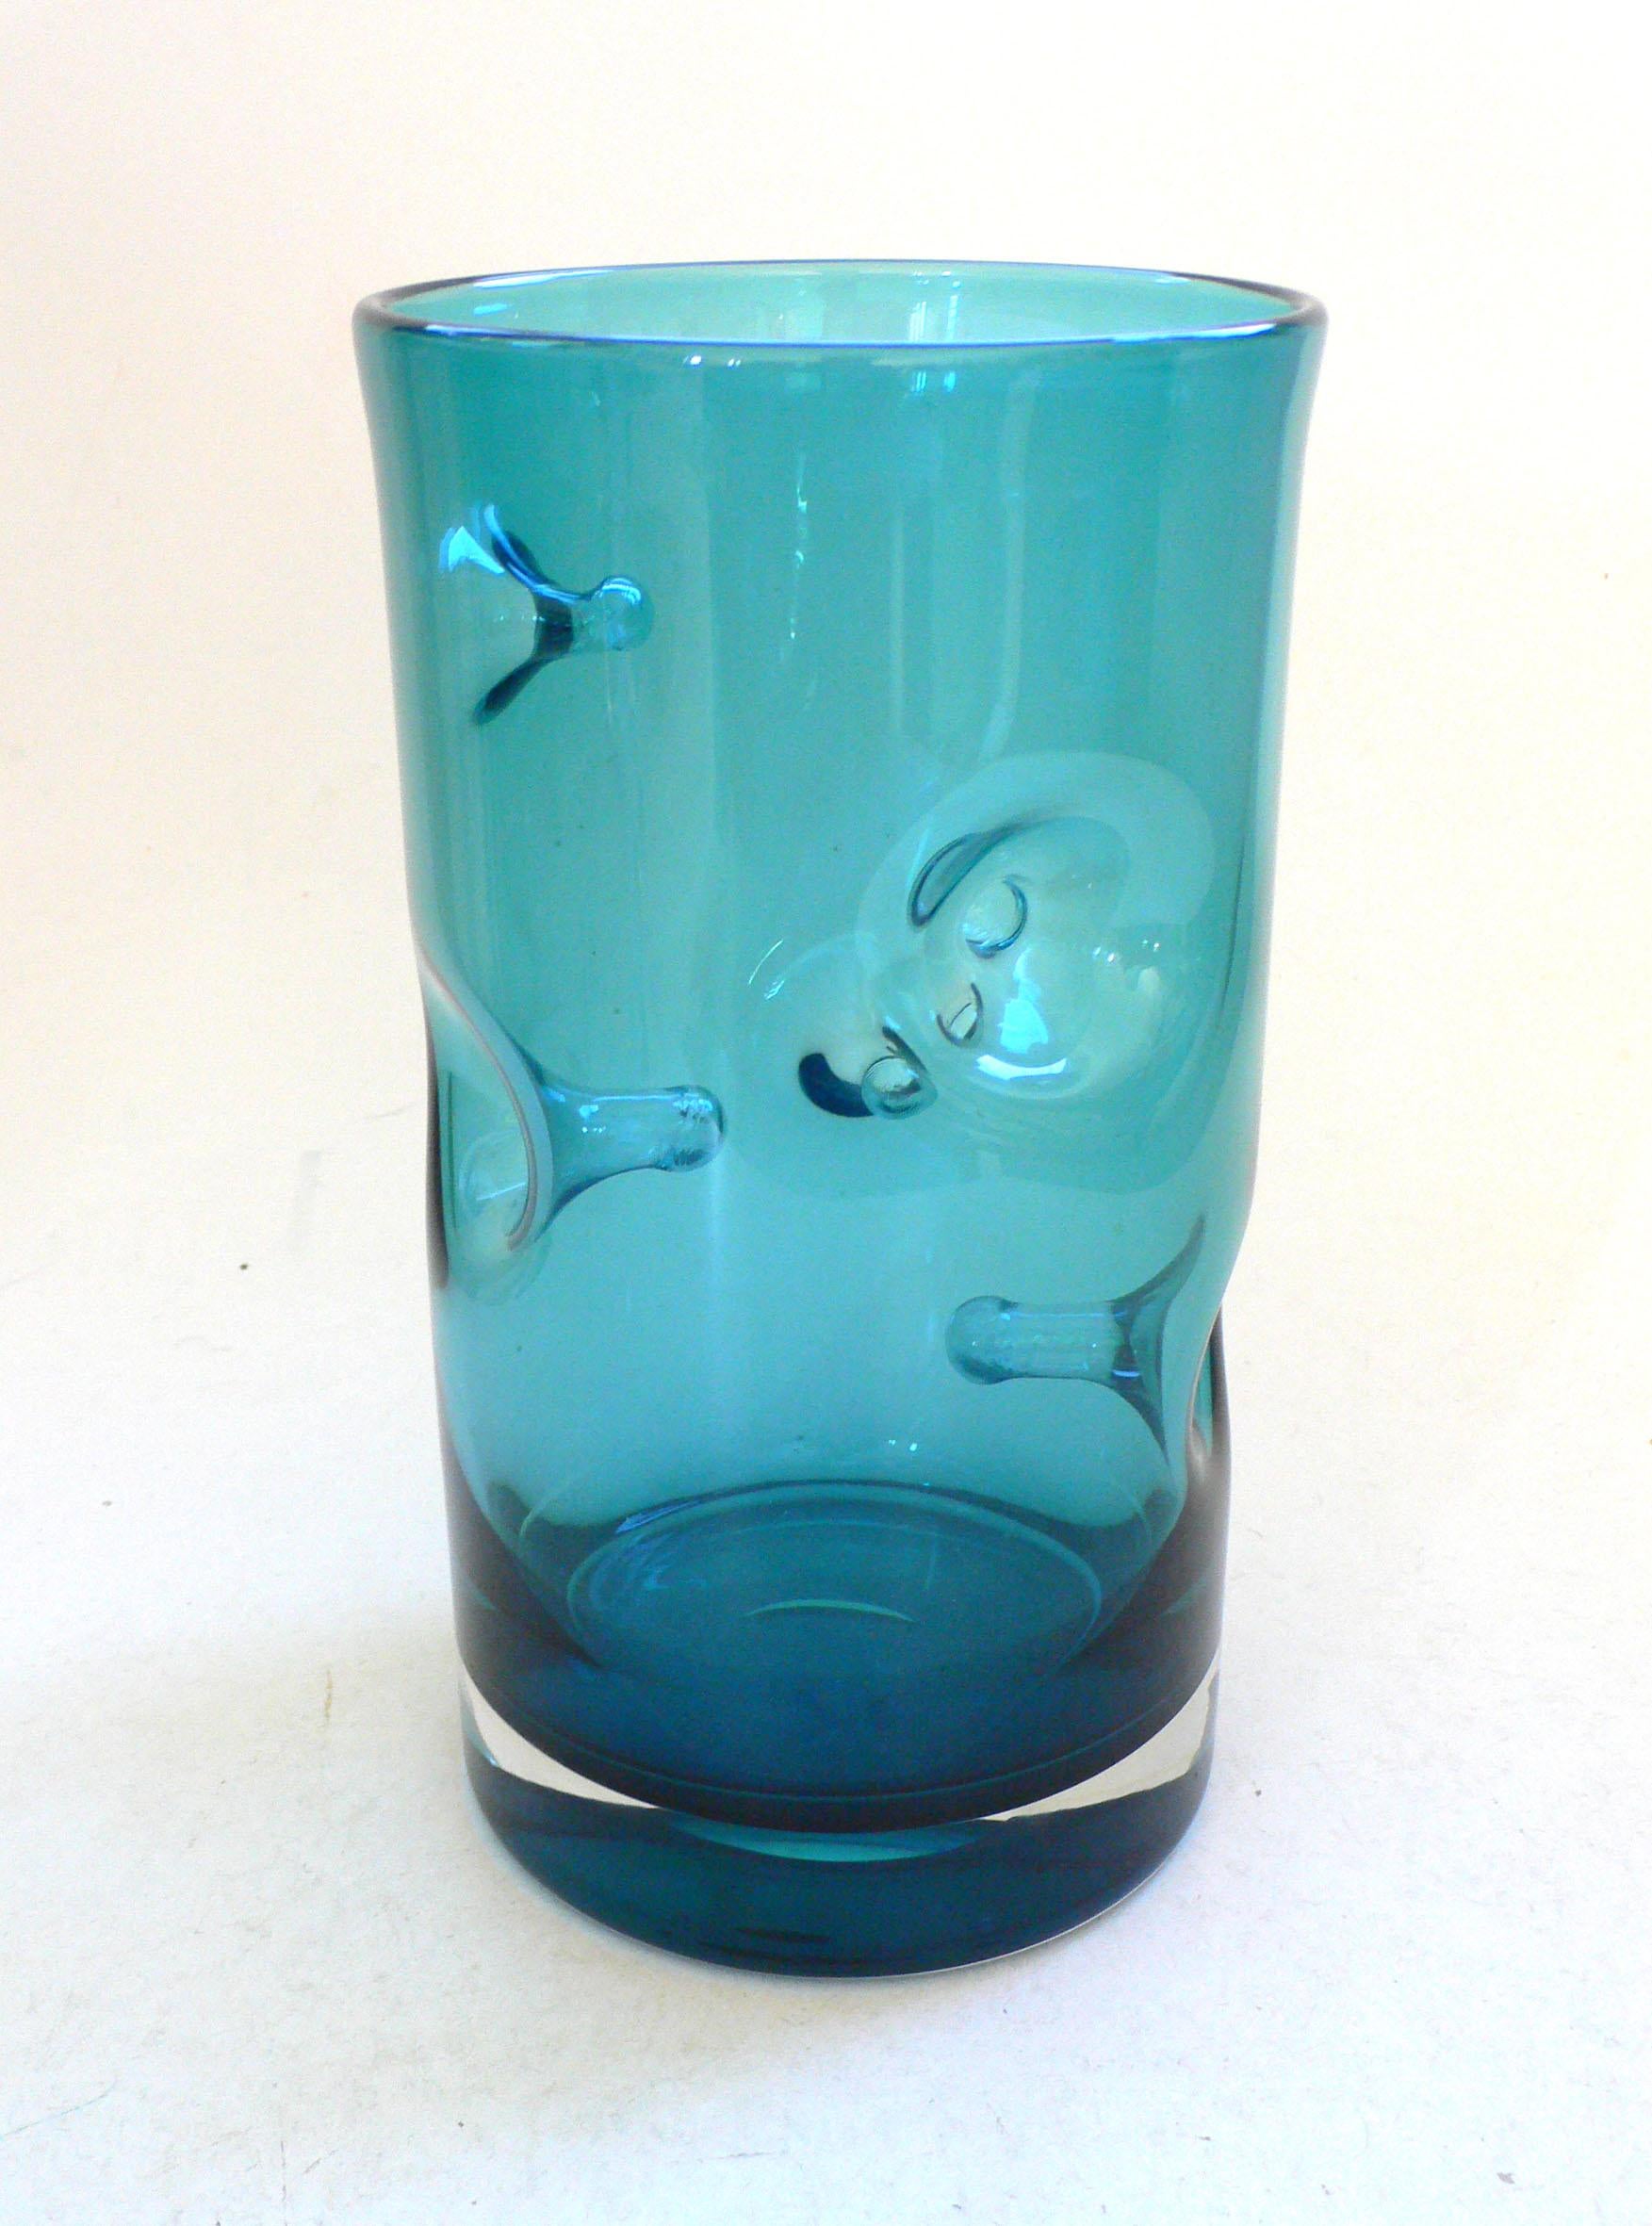 A beautiful vintage 1960's pinched nipple blue Art Glass Vase. Handblown and made in Belgium. No markings or signature. 23cm high x 13cm diameter. Very good condition, no blemishes. 23cm x 13cm x 13cm.